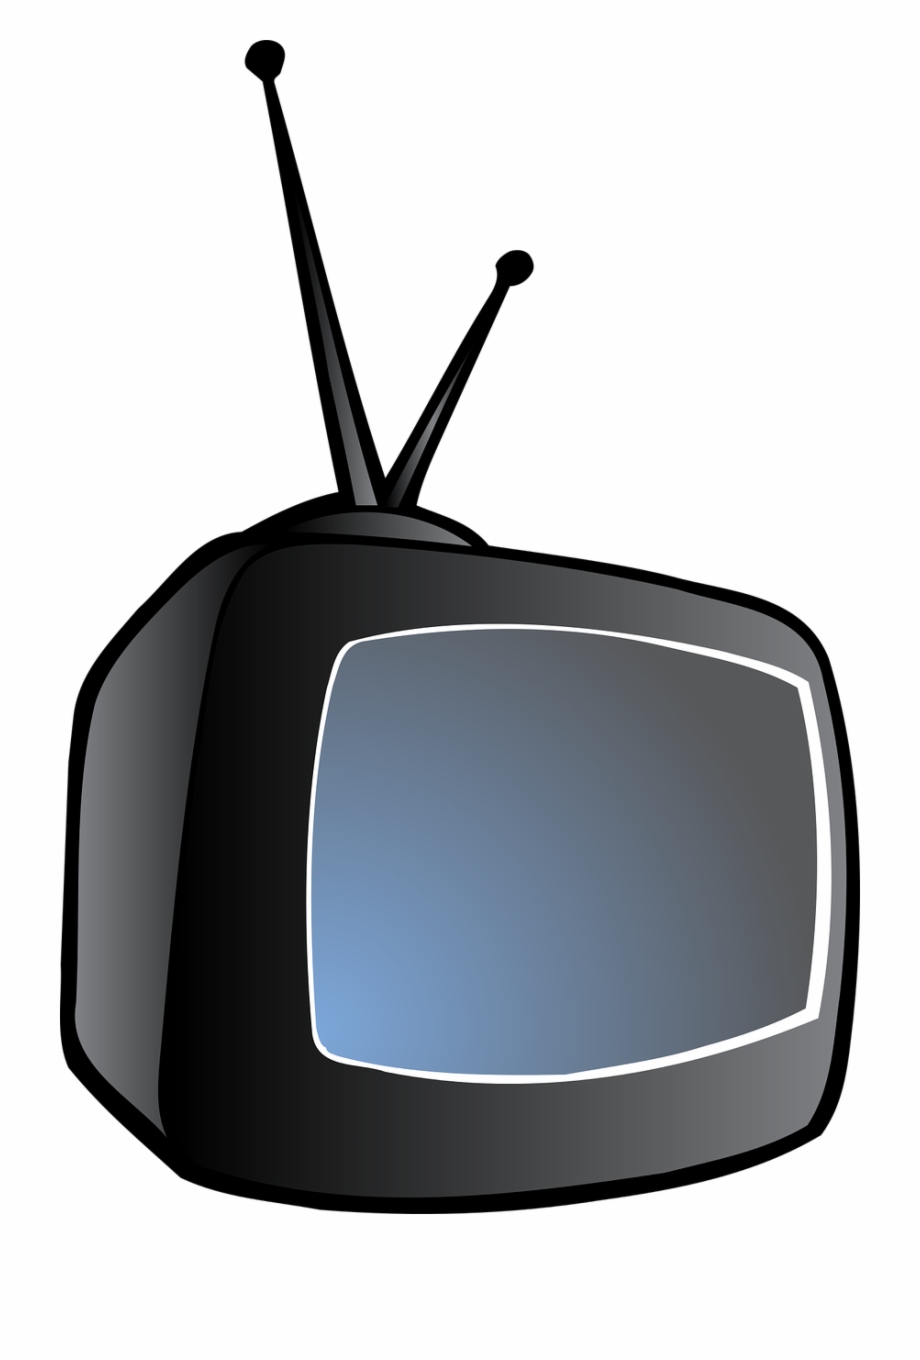 Analog Old School Television Png Image